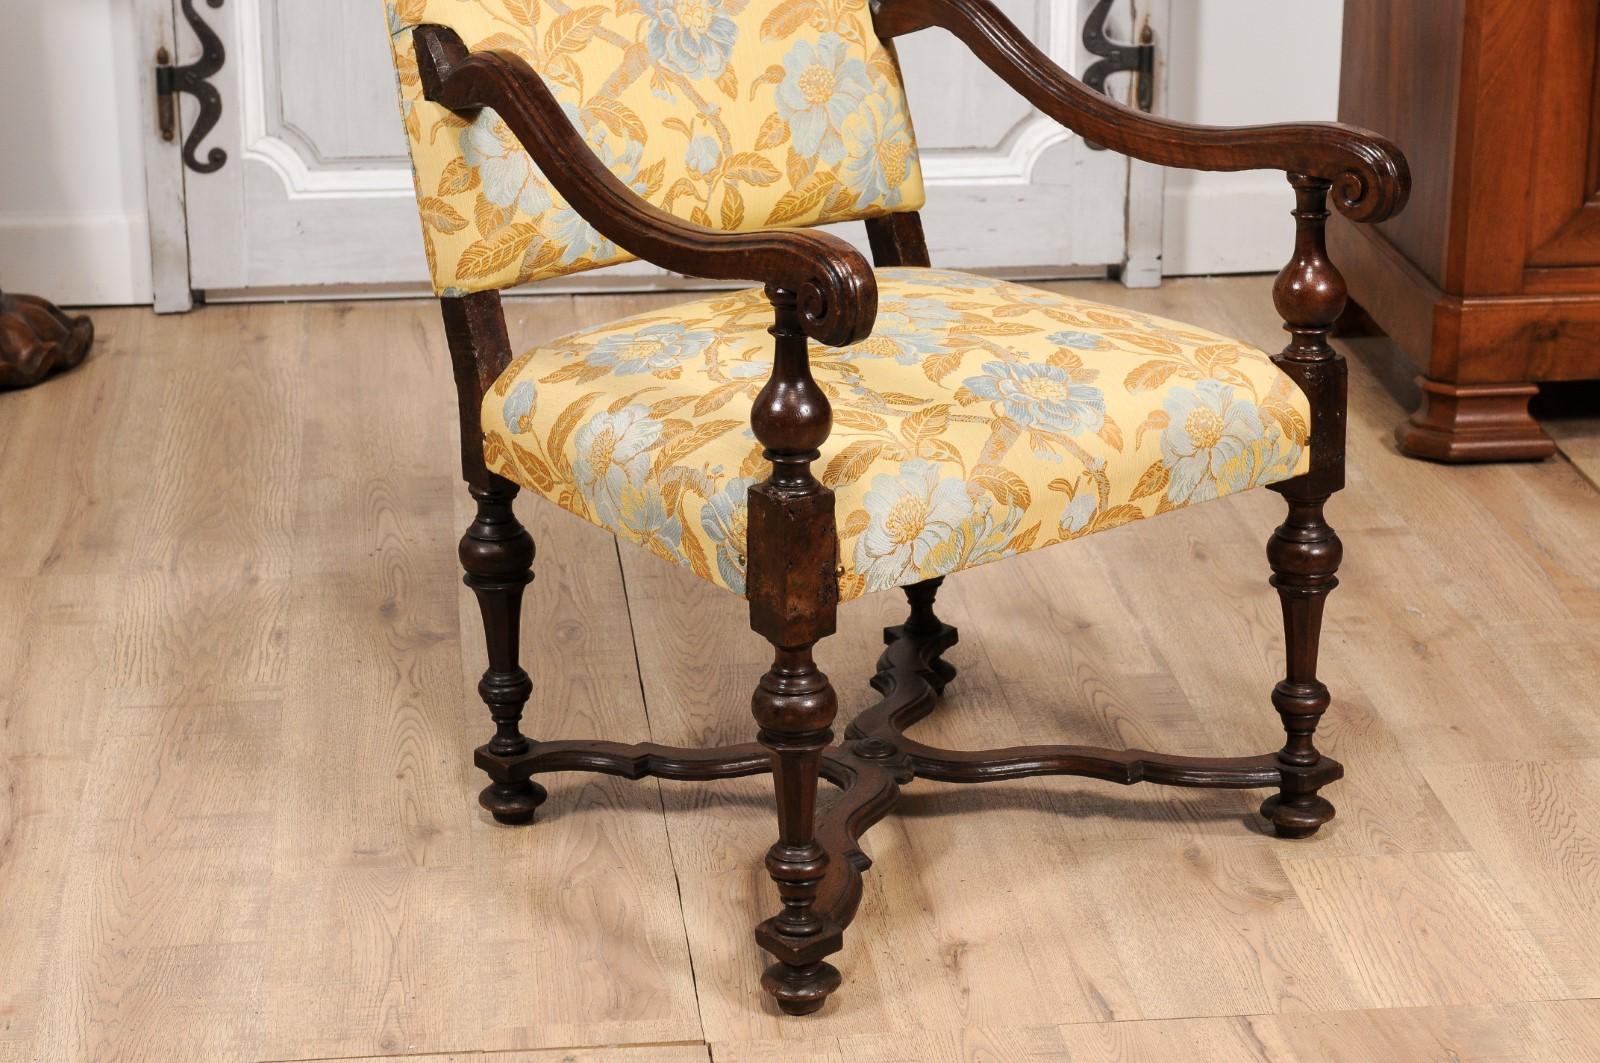 Upholstery Italian Baroque Period 17th Century Walnut Armchair with Carved X-Form Stretcher For Sale